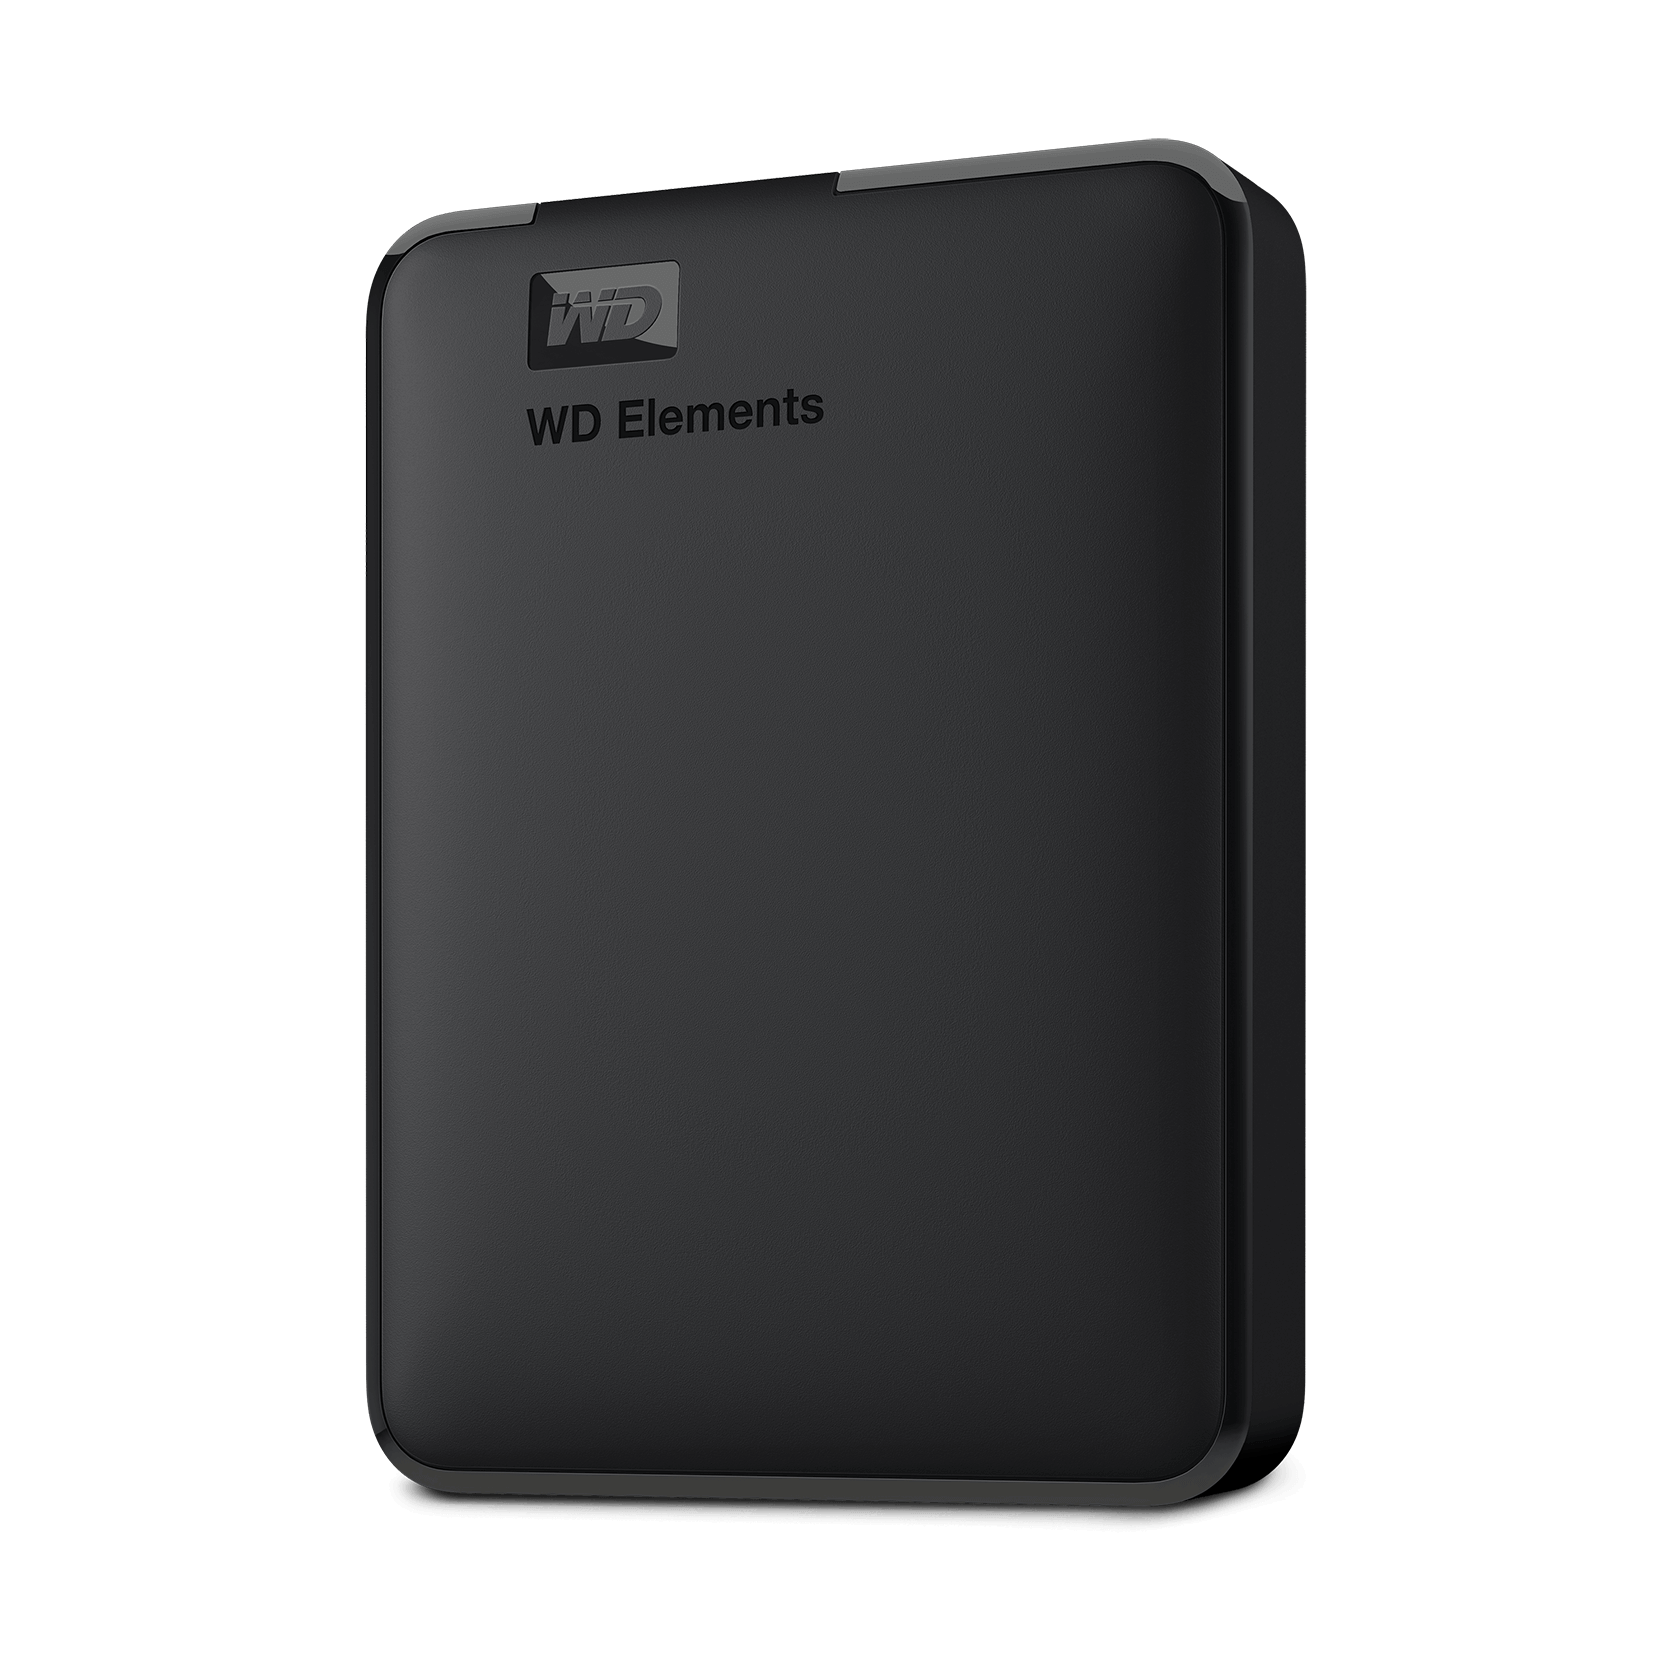 WD 4TB Elements Portable External Hard Drive HDD, USB 3.0, Compatible with PC, Mac, PS4 & Xbox - WDBU6Y0040BBK-WESN